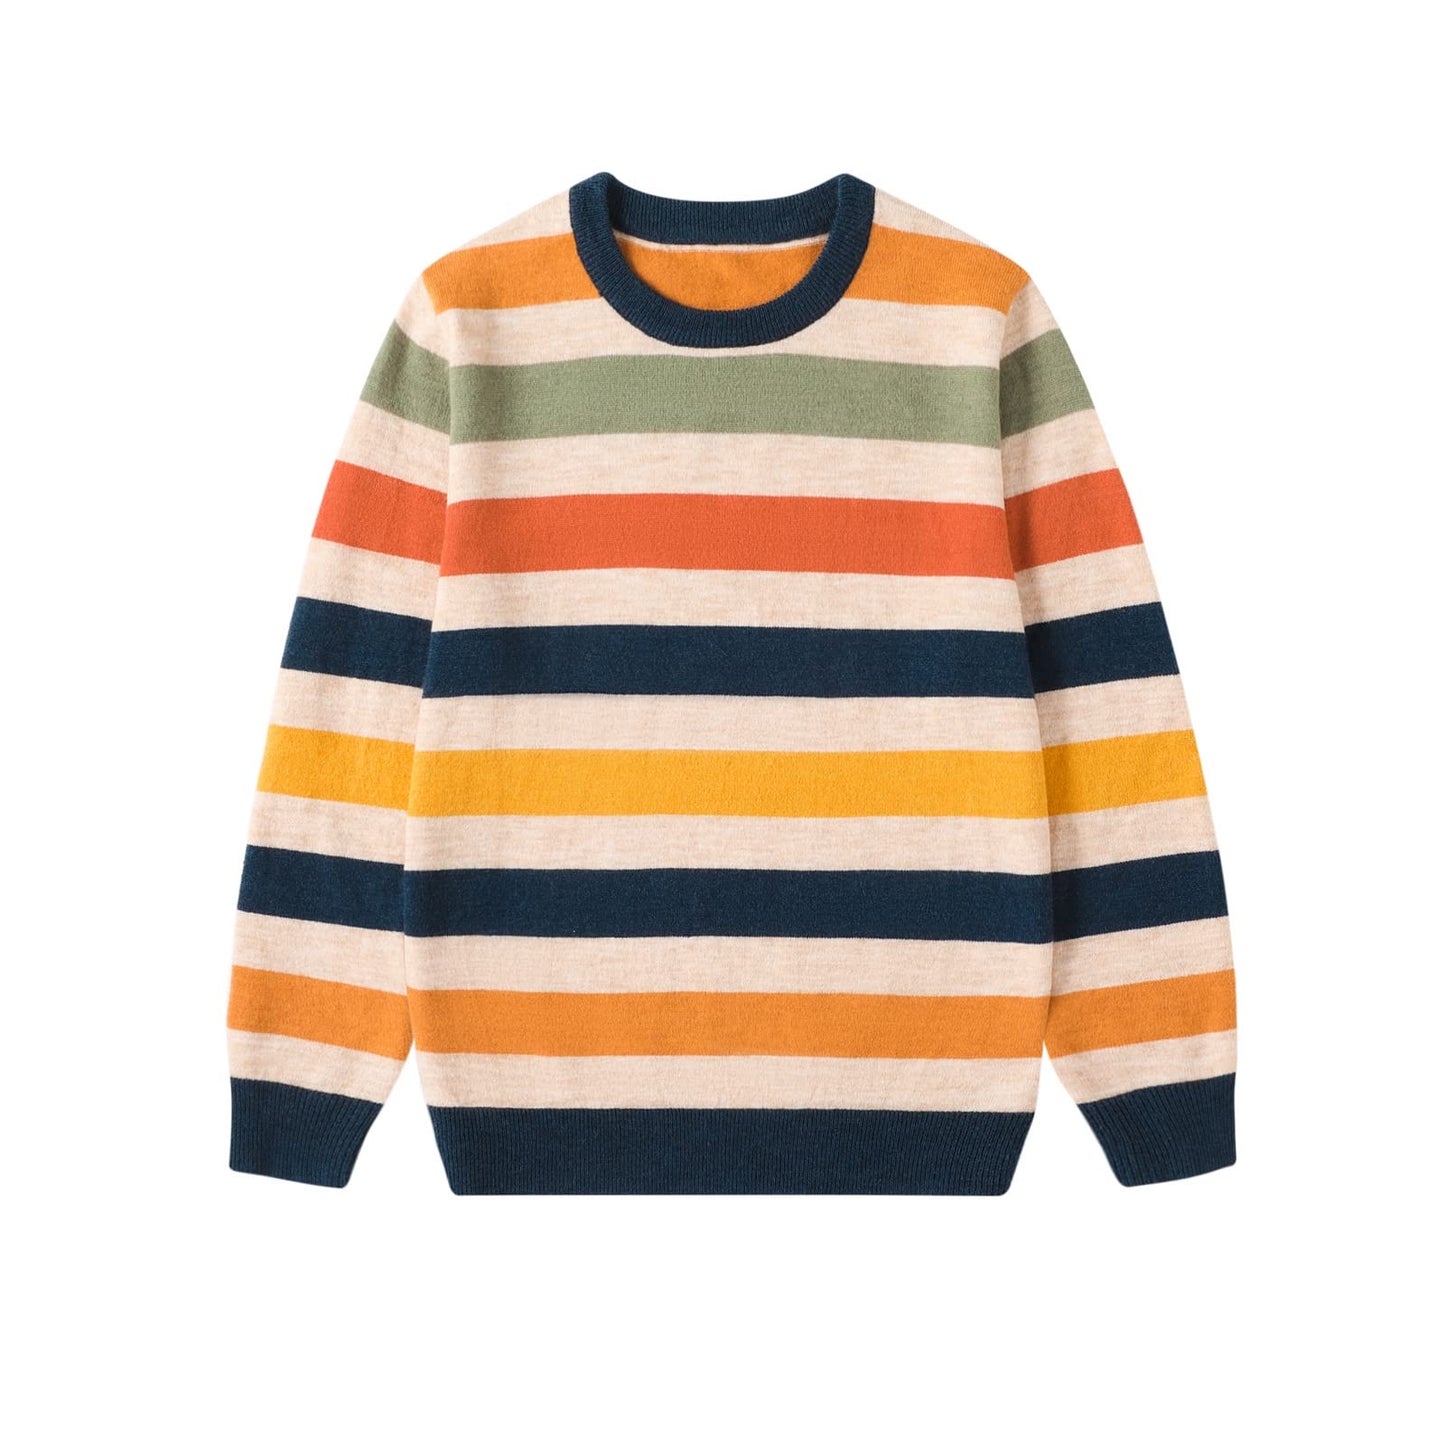 BASADINA Boys Jumpers Long Sleeve Striped Sweater Pullover Kids Knitwear Christmas Knitted Sweatershirt Warm Tops Clothes Age 4-14 Years